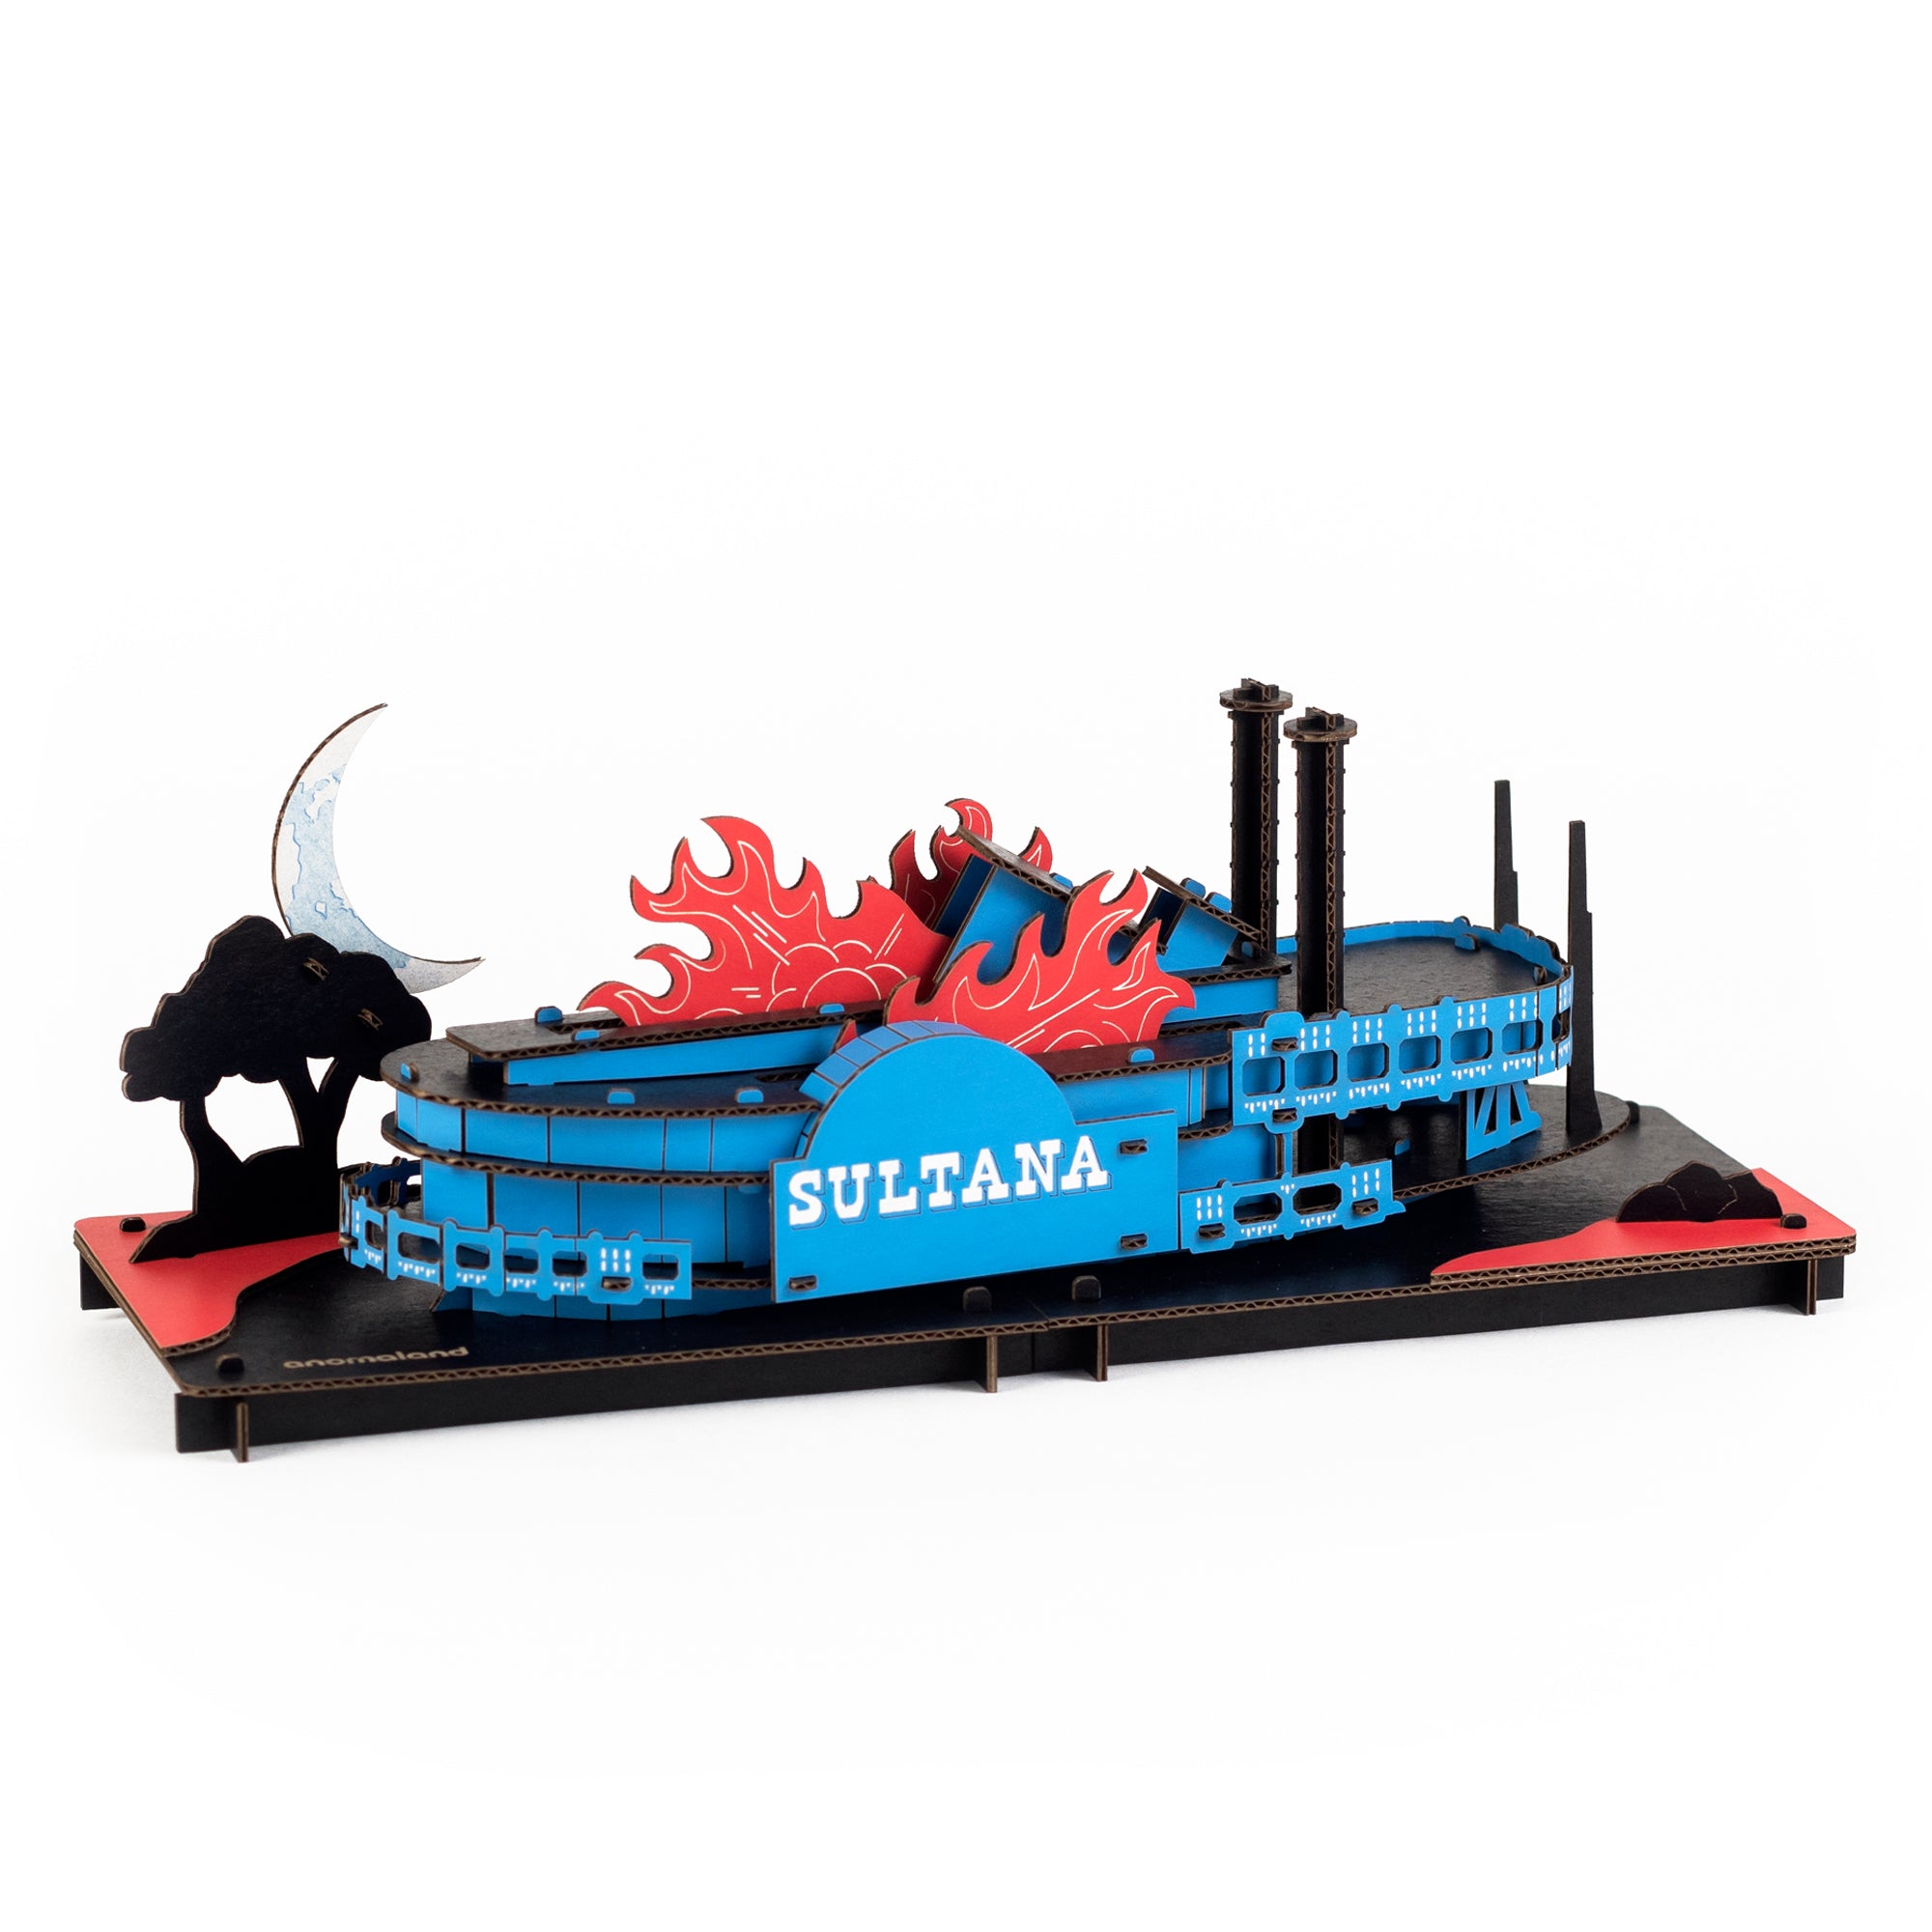 Sultana Steamboat Disaster Model Kit from the Sultana Disaster 1865